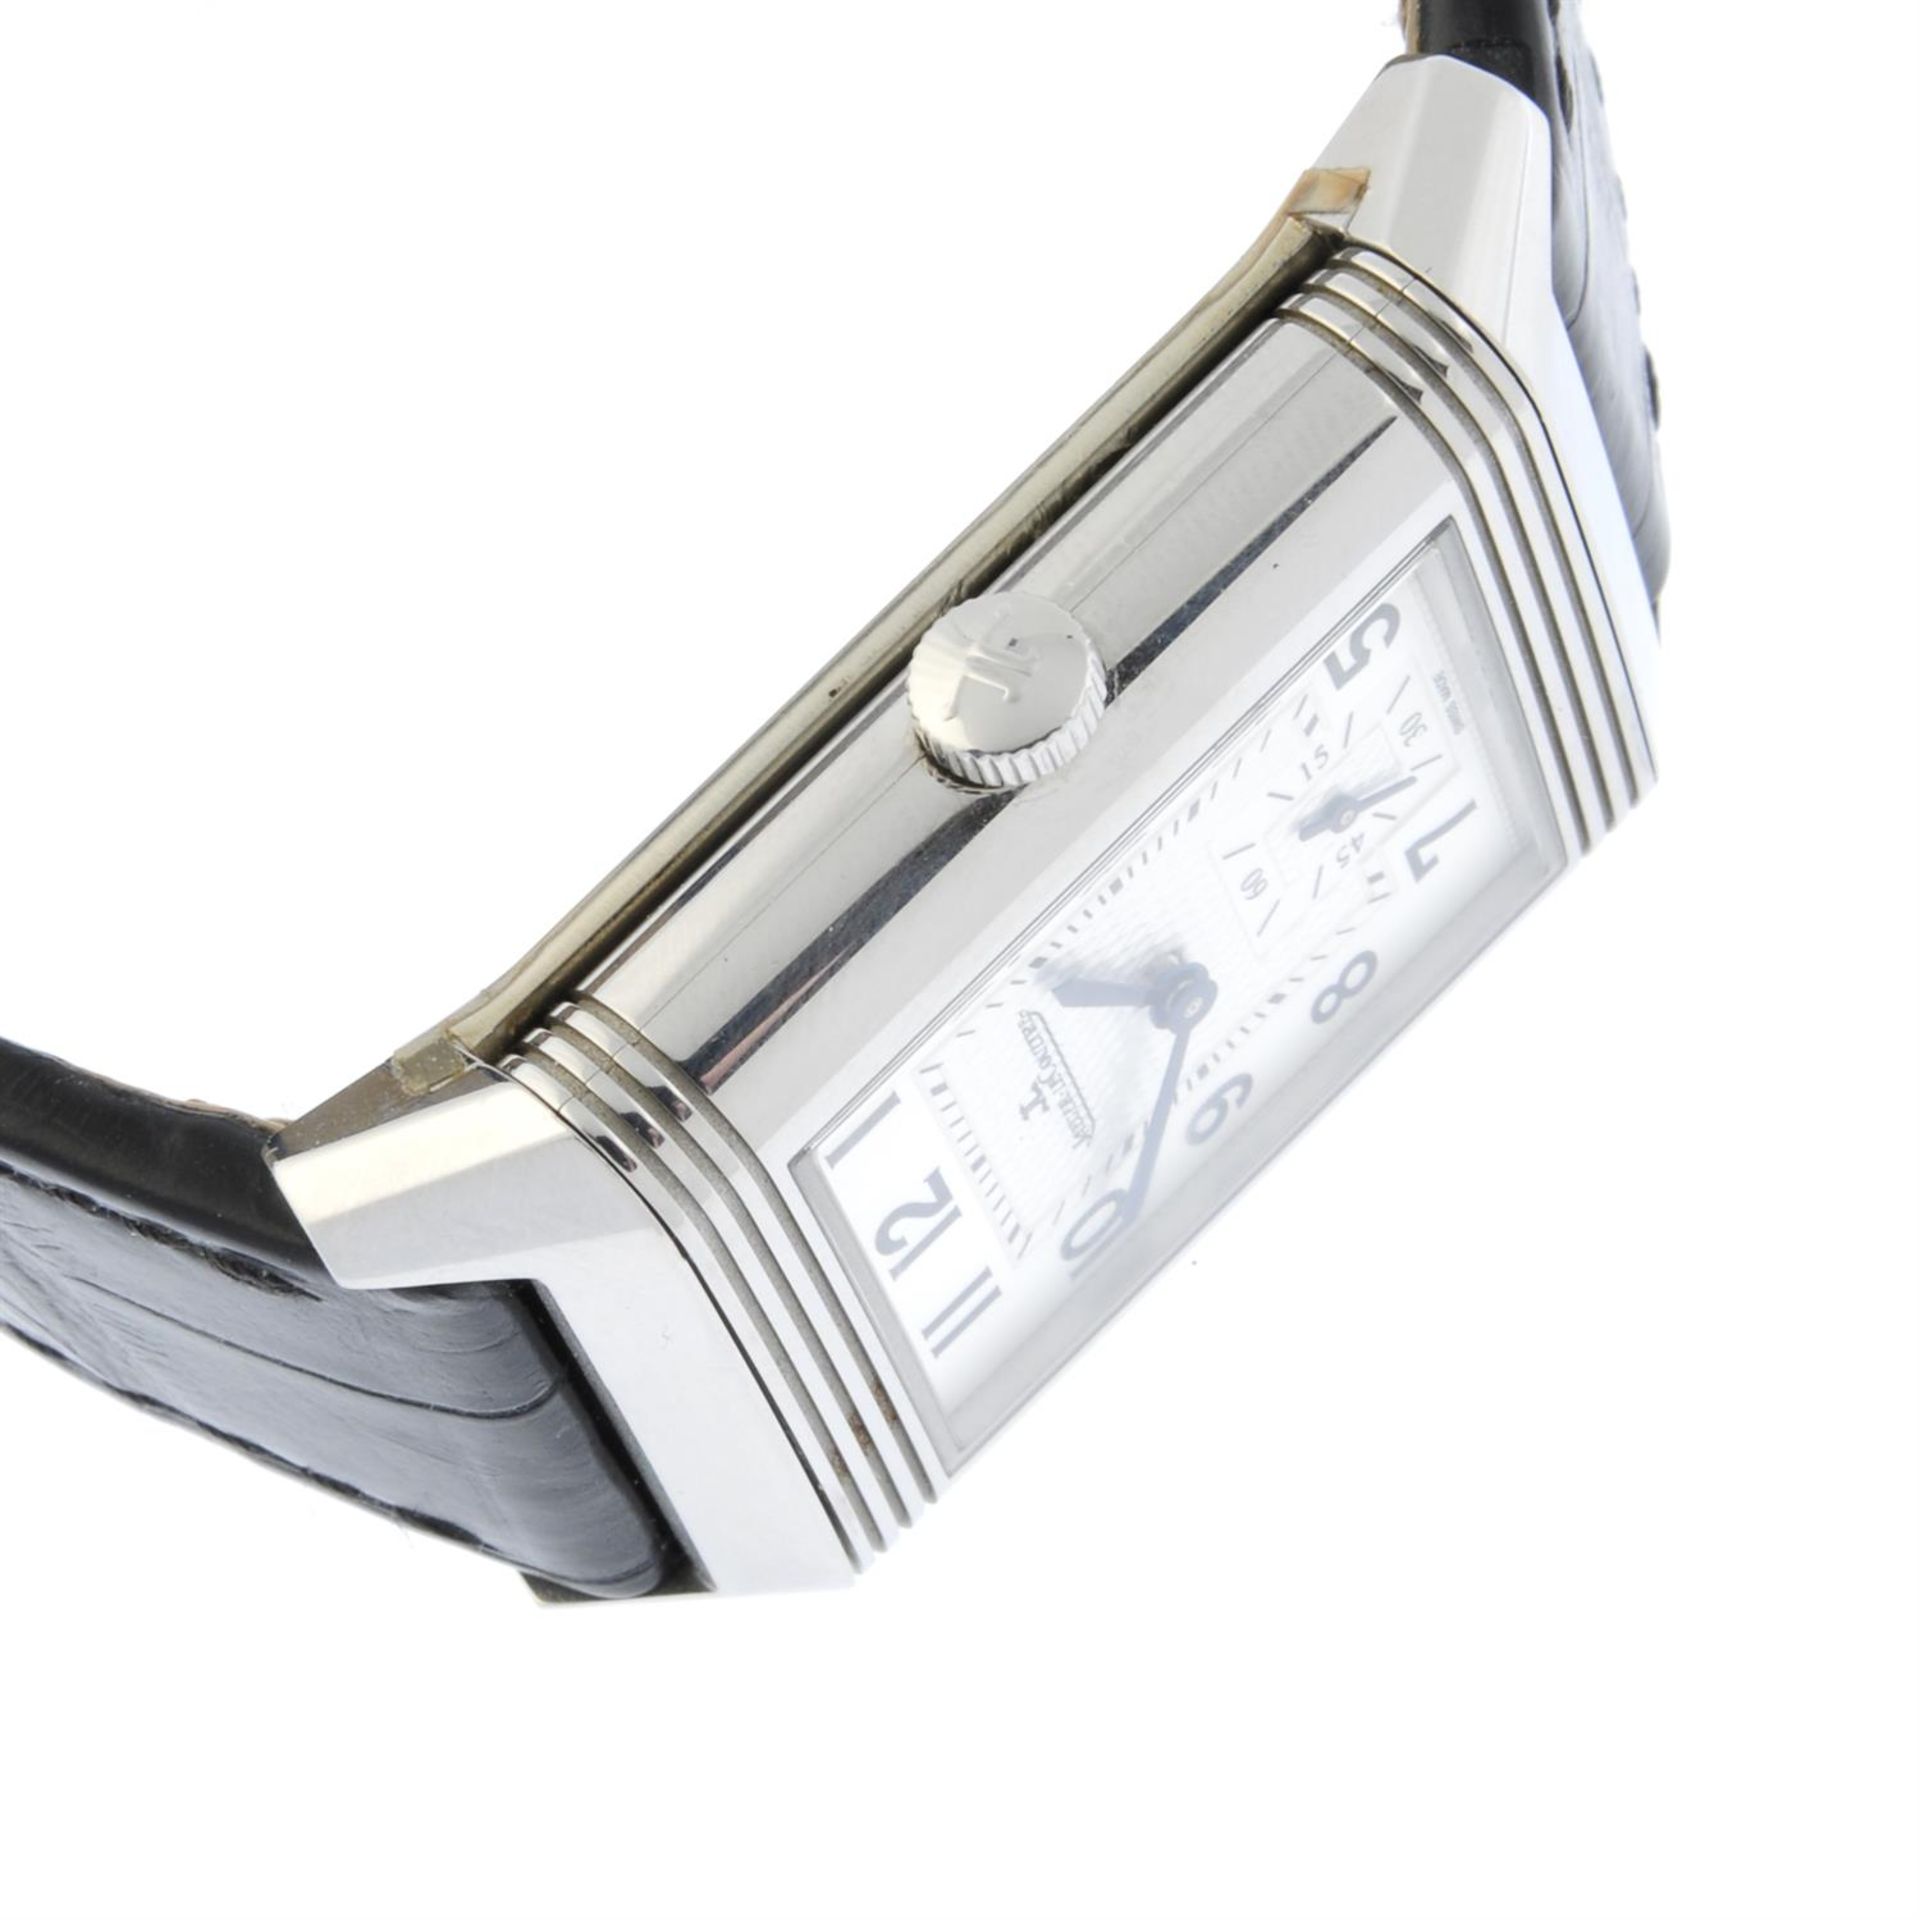 JAEGER-LECOULTRE - a stainless steel Reverso wrist watch, 25x38mm - Image 3 of 7